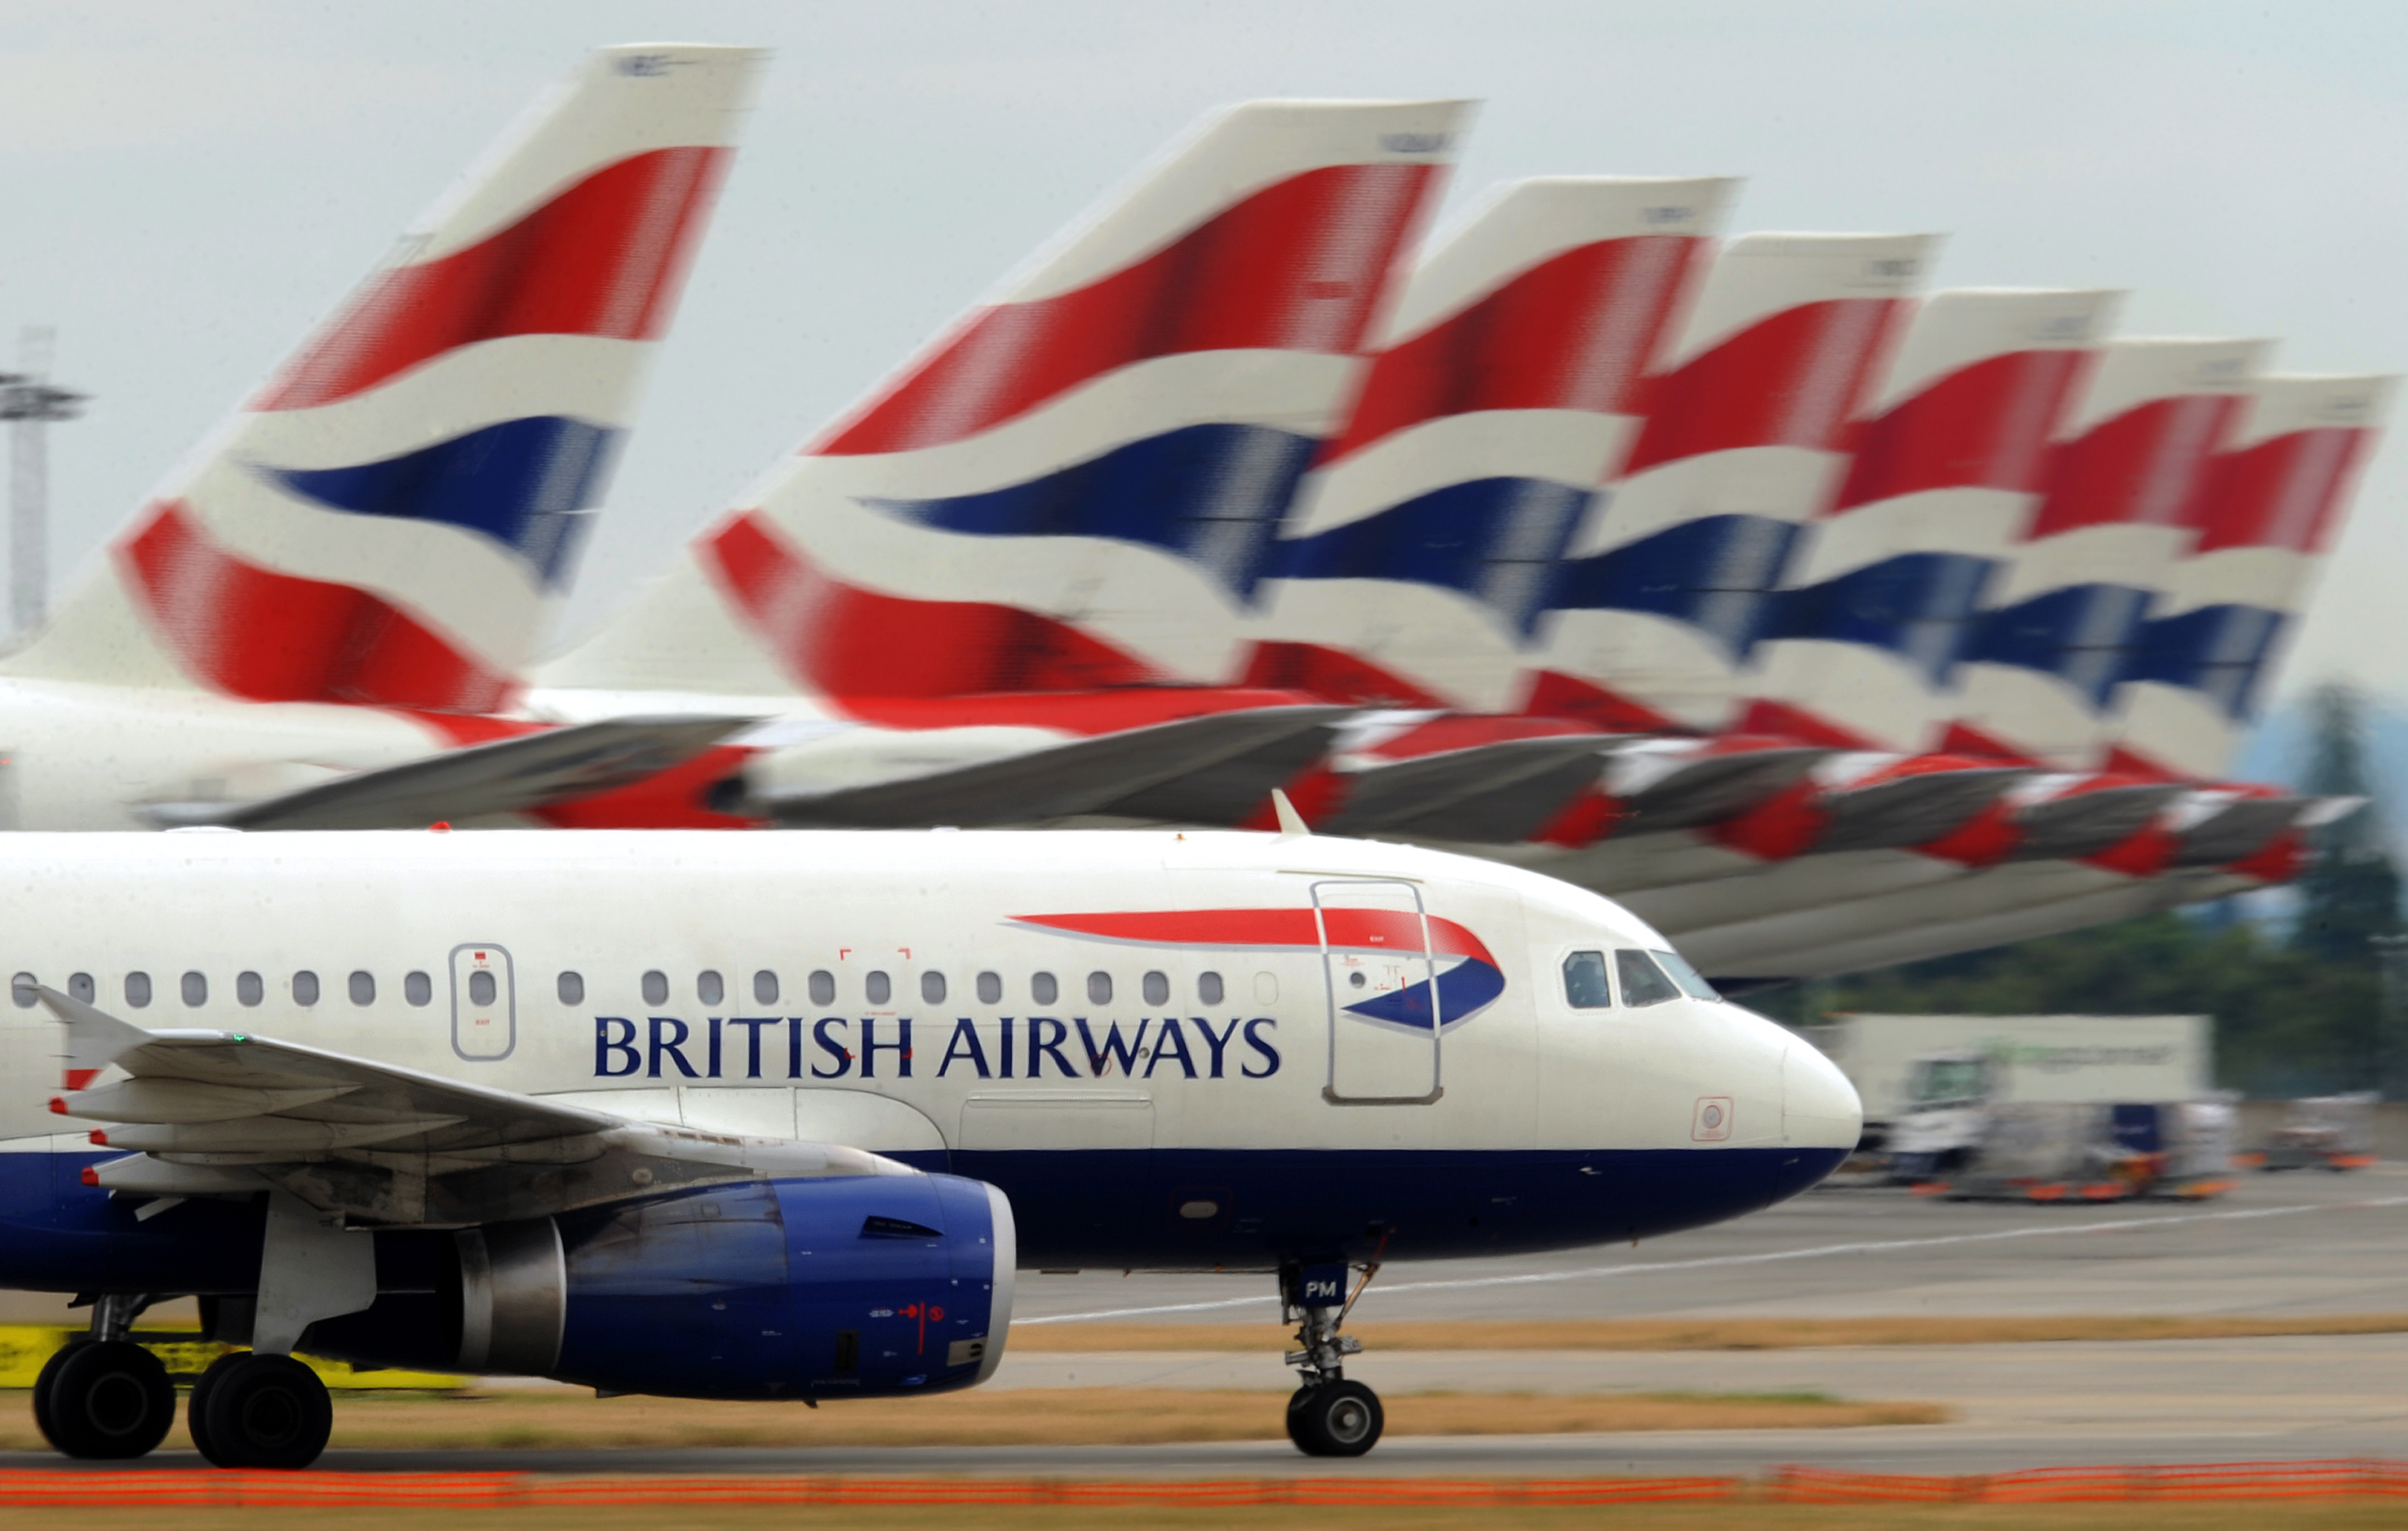 A British Airways aircraft at Terminal 5 of Heathrow Airport in west London, on July 30, 2010. (BEN STANSALL—AFP/Getty Images)